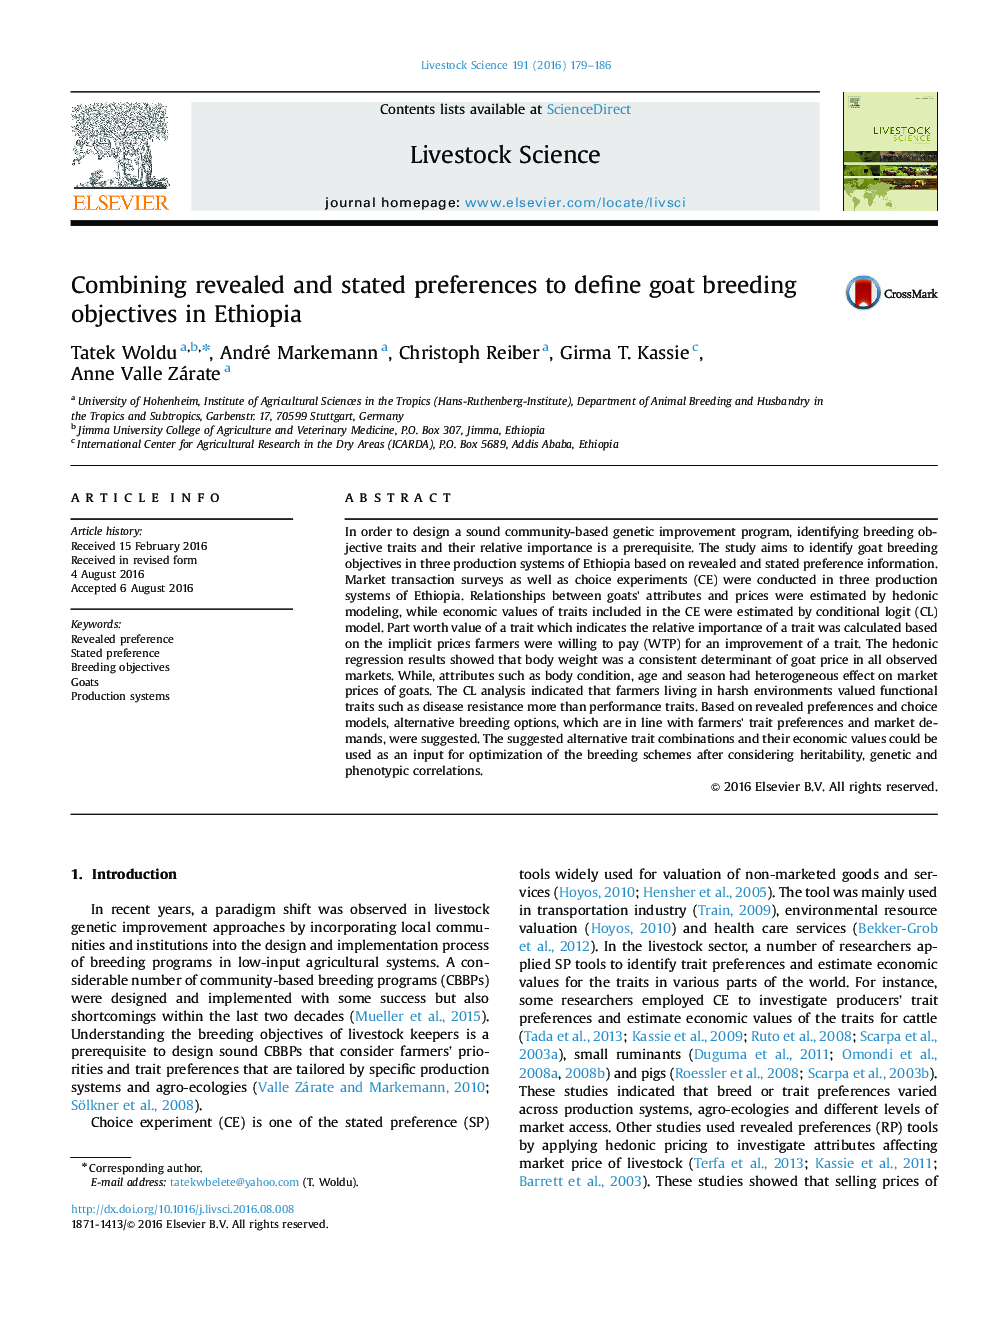 Combining revealed and stated preferences to define goat breeding objectives in Ethiopia